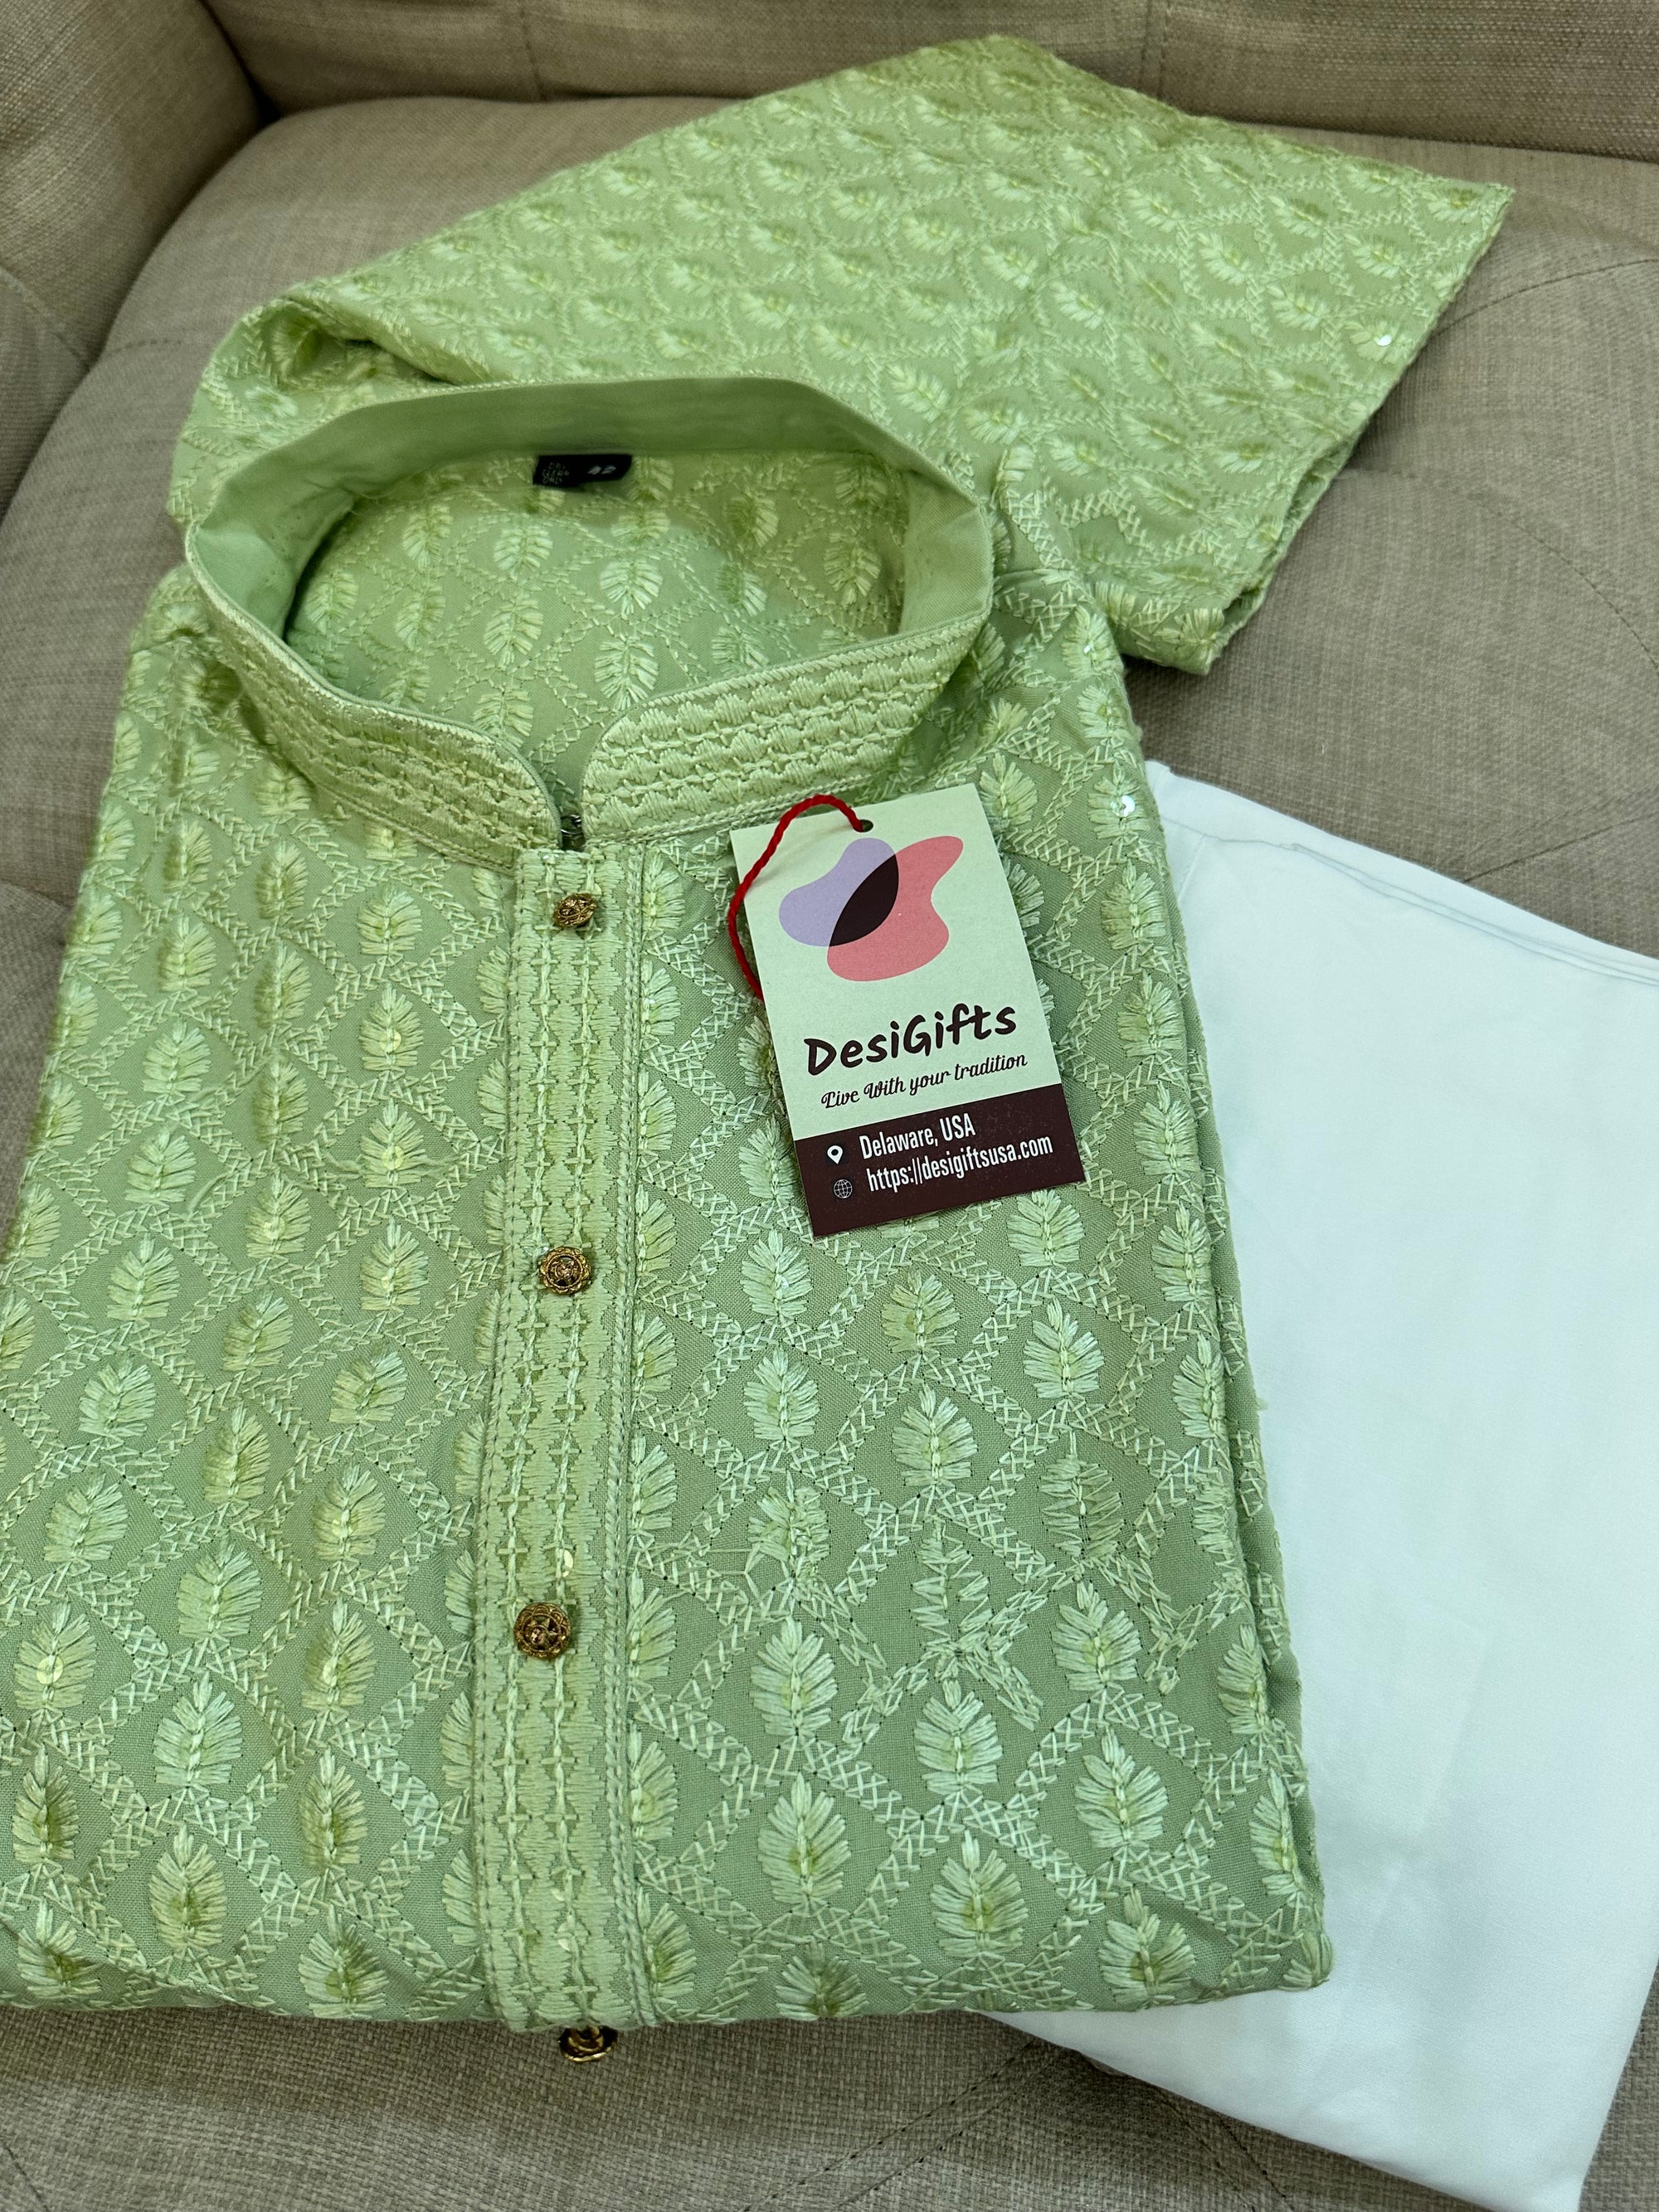 Size 38, Lime Green embroidered 2 Piece Kurta Pajama Set for Man, Soft and lightweight KP - 1295